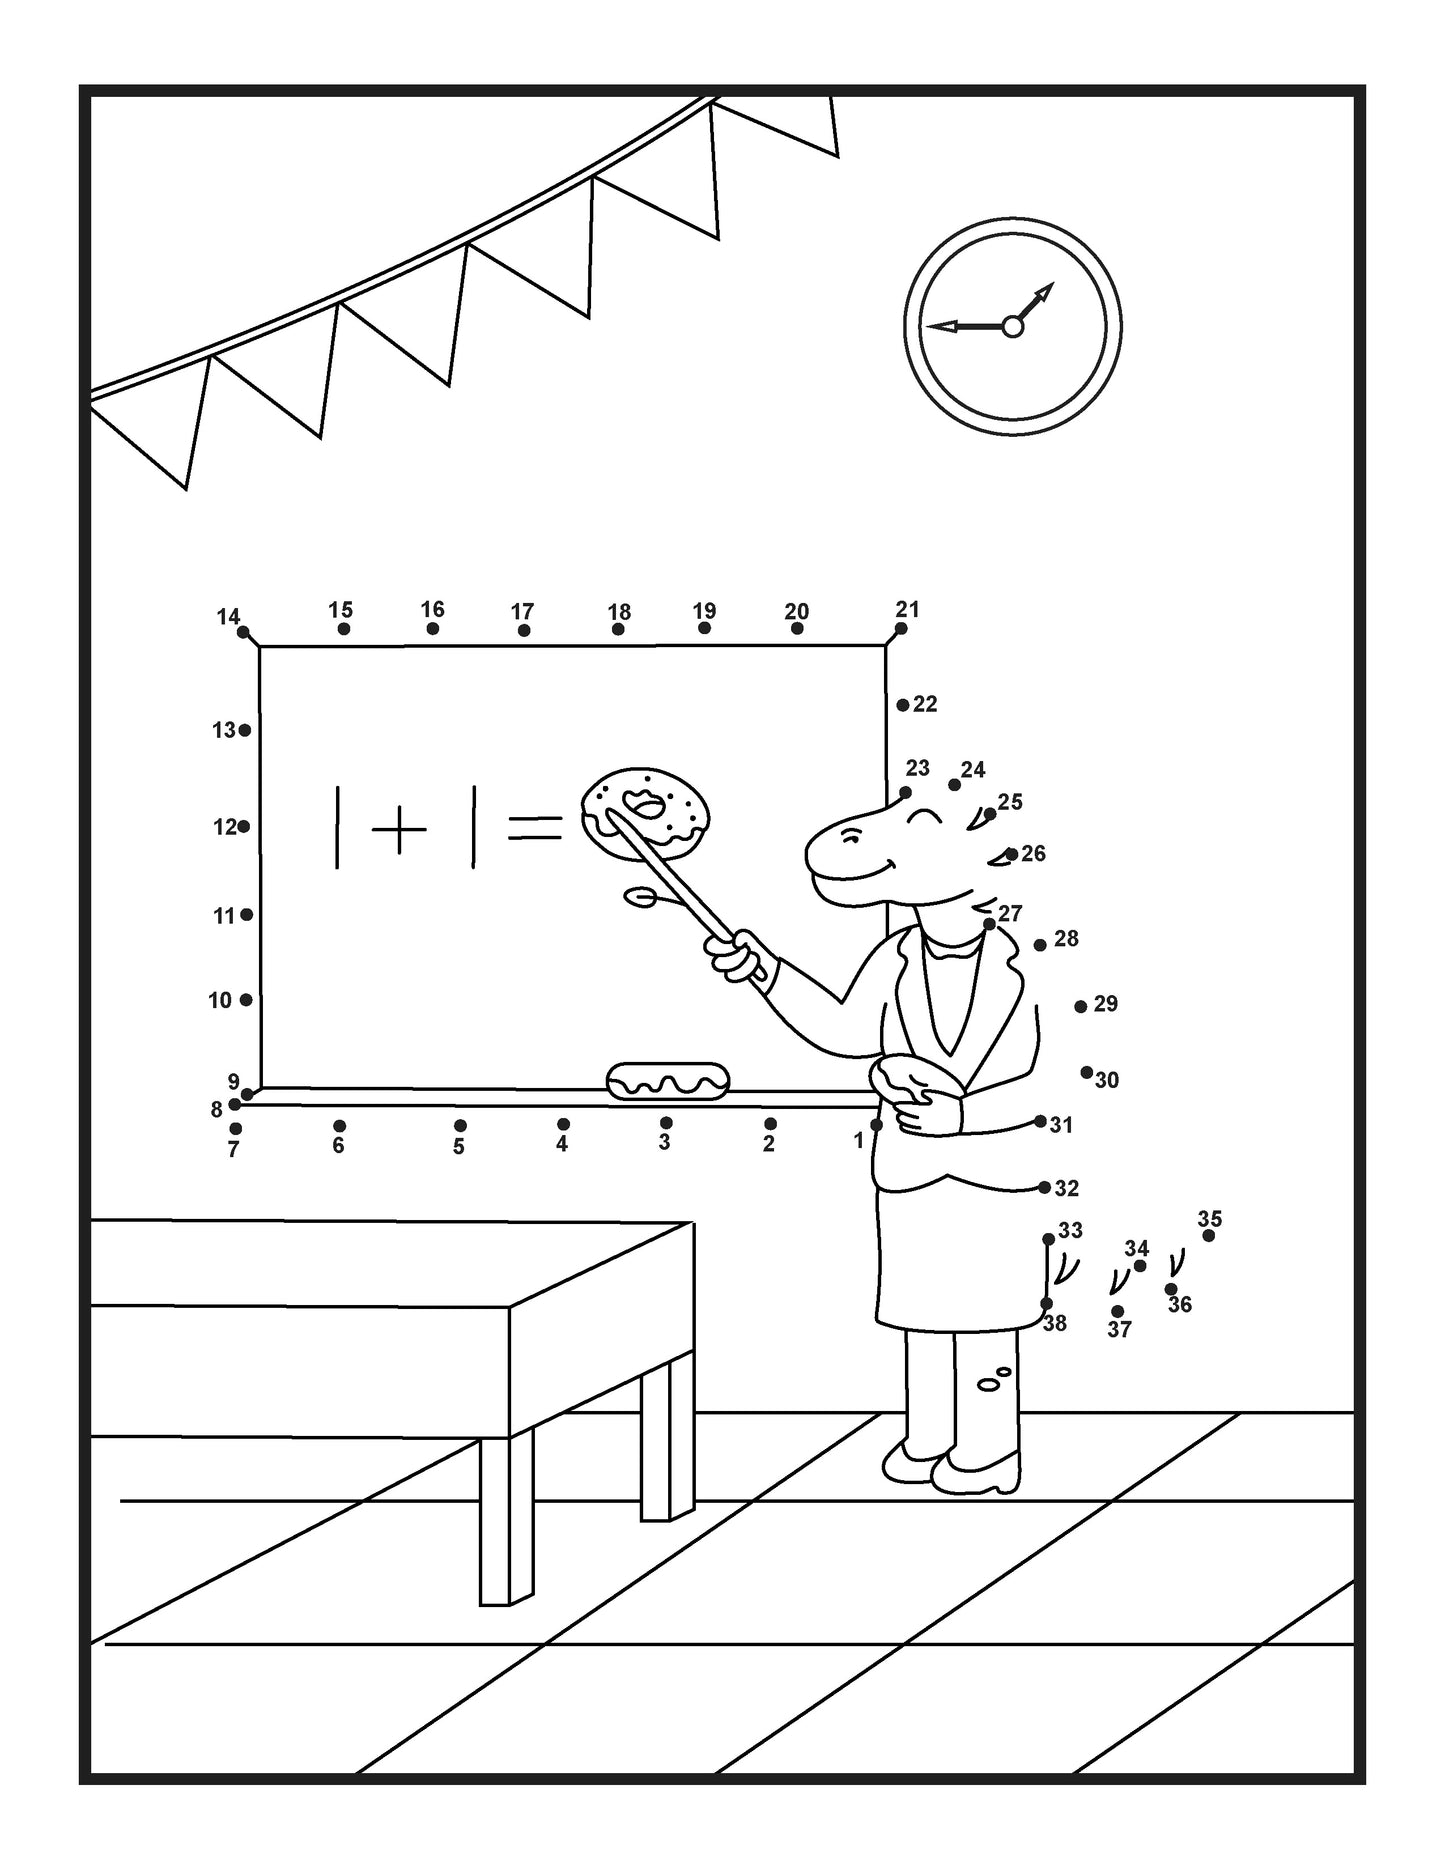 This activity sheet depicts a cartoon dinosaur in a classroom setting acting as a teacher, featuring a connect-the-dots game. The dinosaur, stands beside a chalkboard with a simple addition problem. The room includes a clock, a festoon of pennants, and a doughnut on the table. Numbered dots from 1 to 35 outline the dinosaur and its surroundings, offering an engaging way for kids to practice counting and drawing.